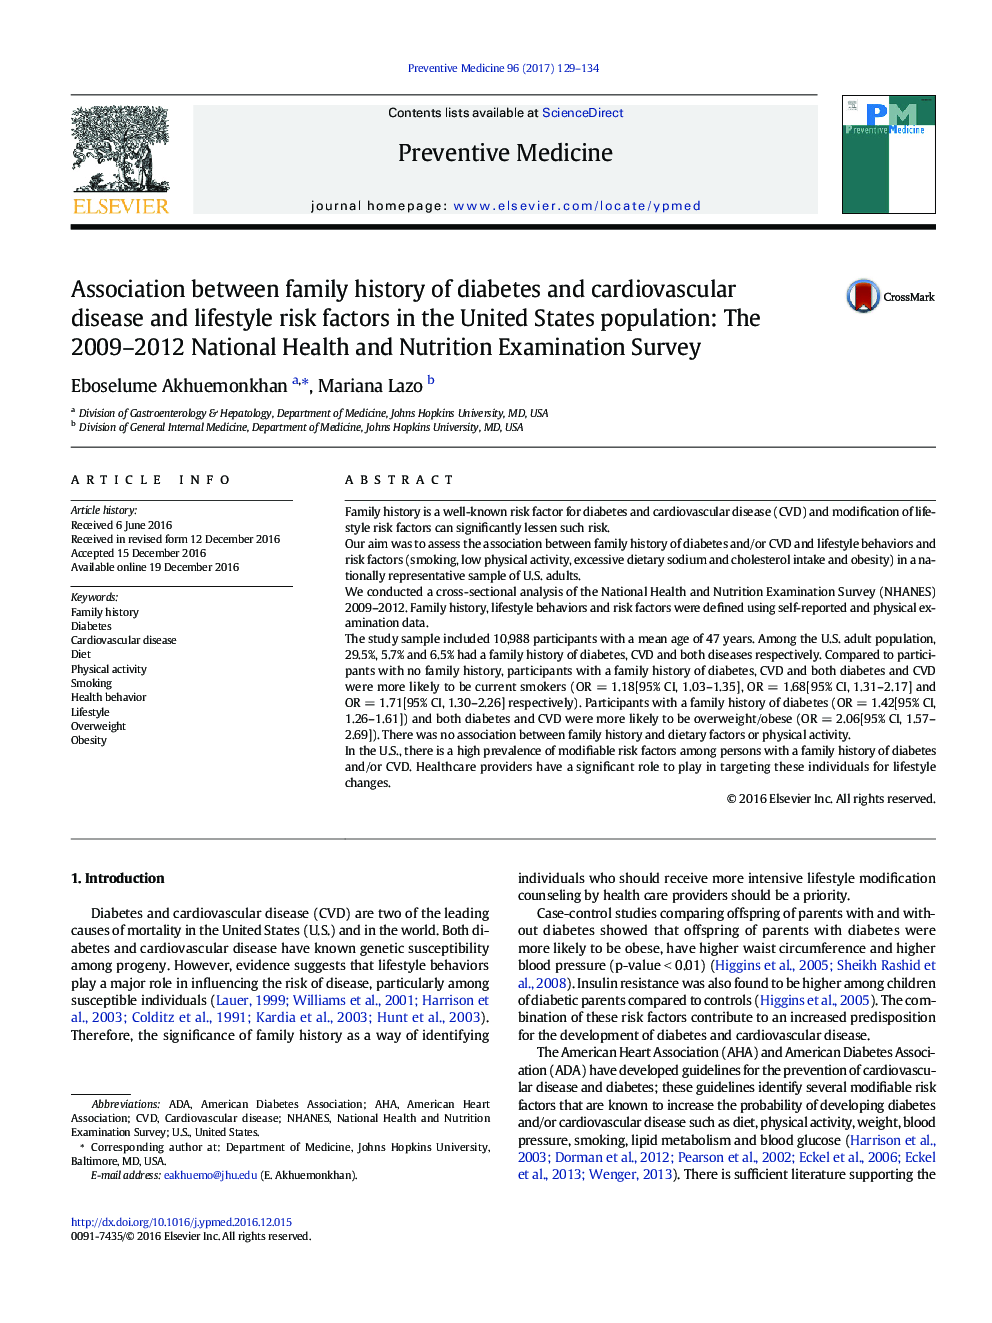 Association between family history of diabetes and cardiovascular disease and lifestyle risk factors in the United States population: The 2009-2012 National Health and Nutrition Examination Survey